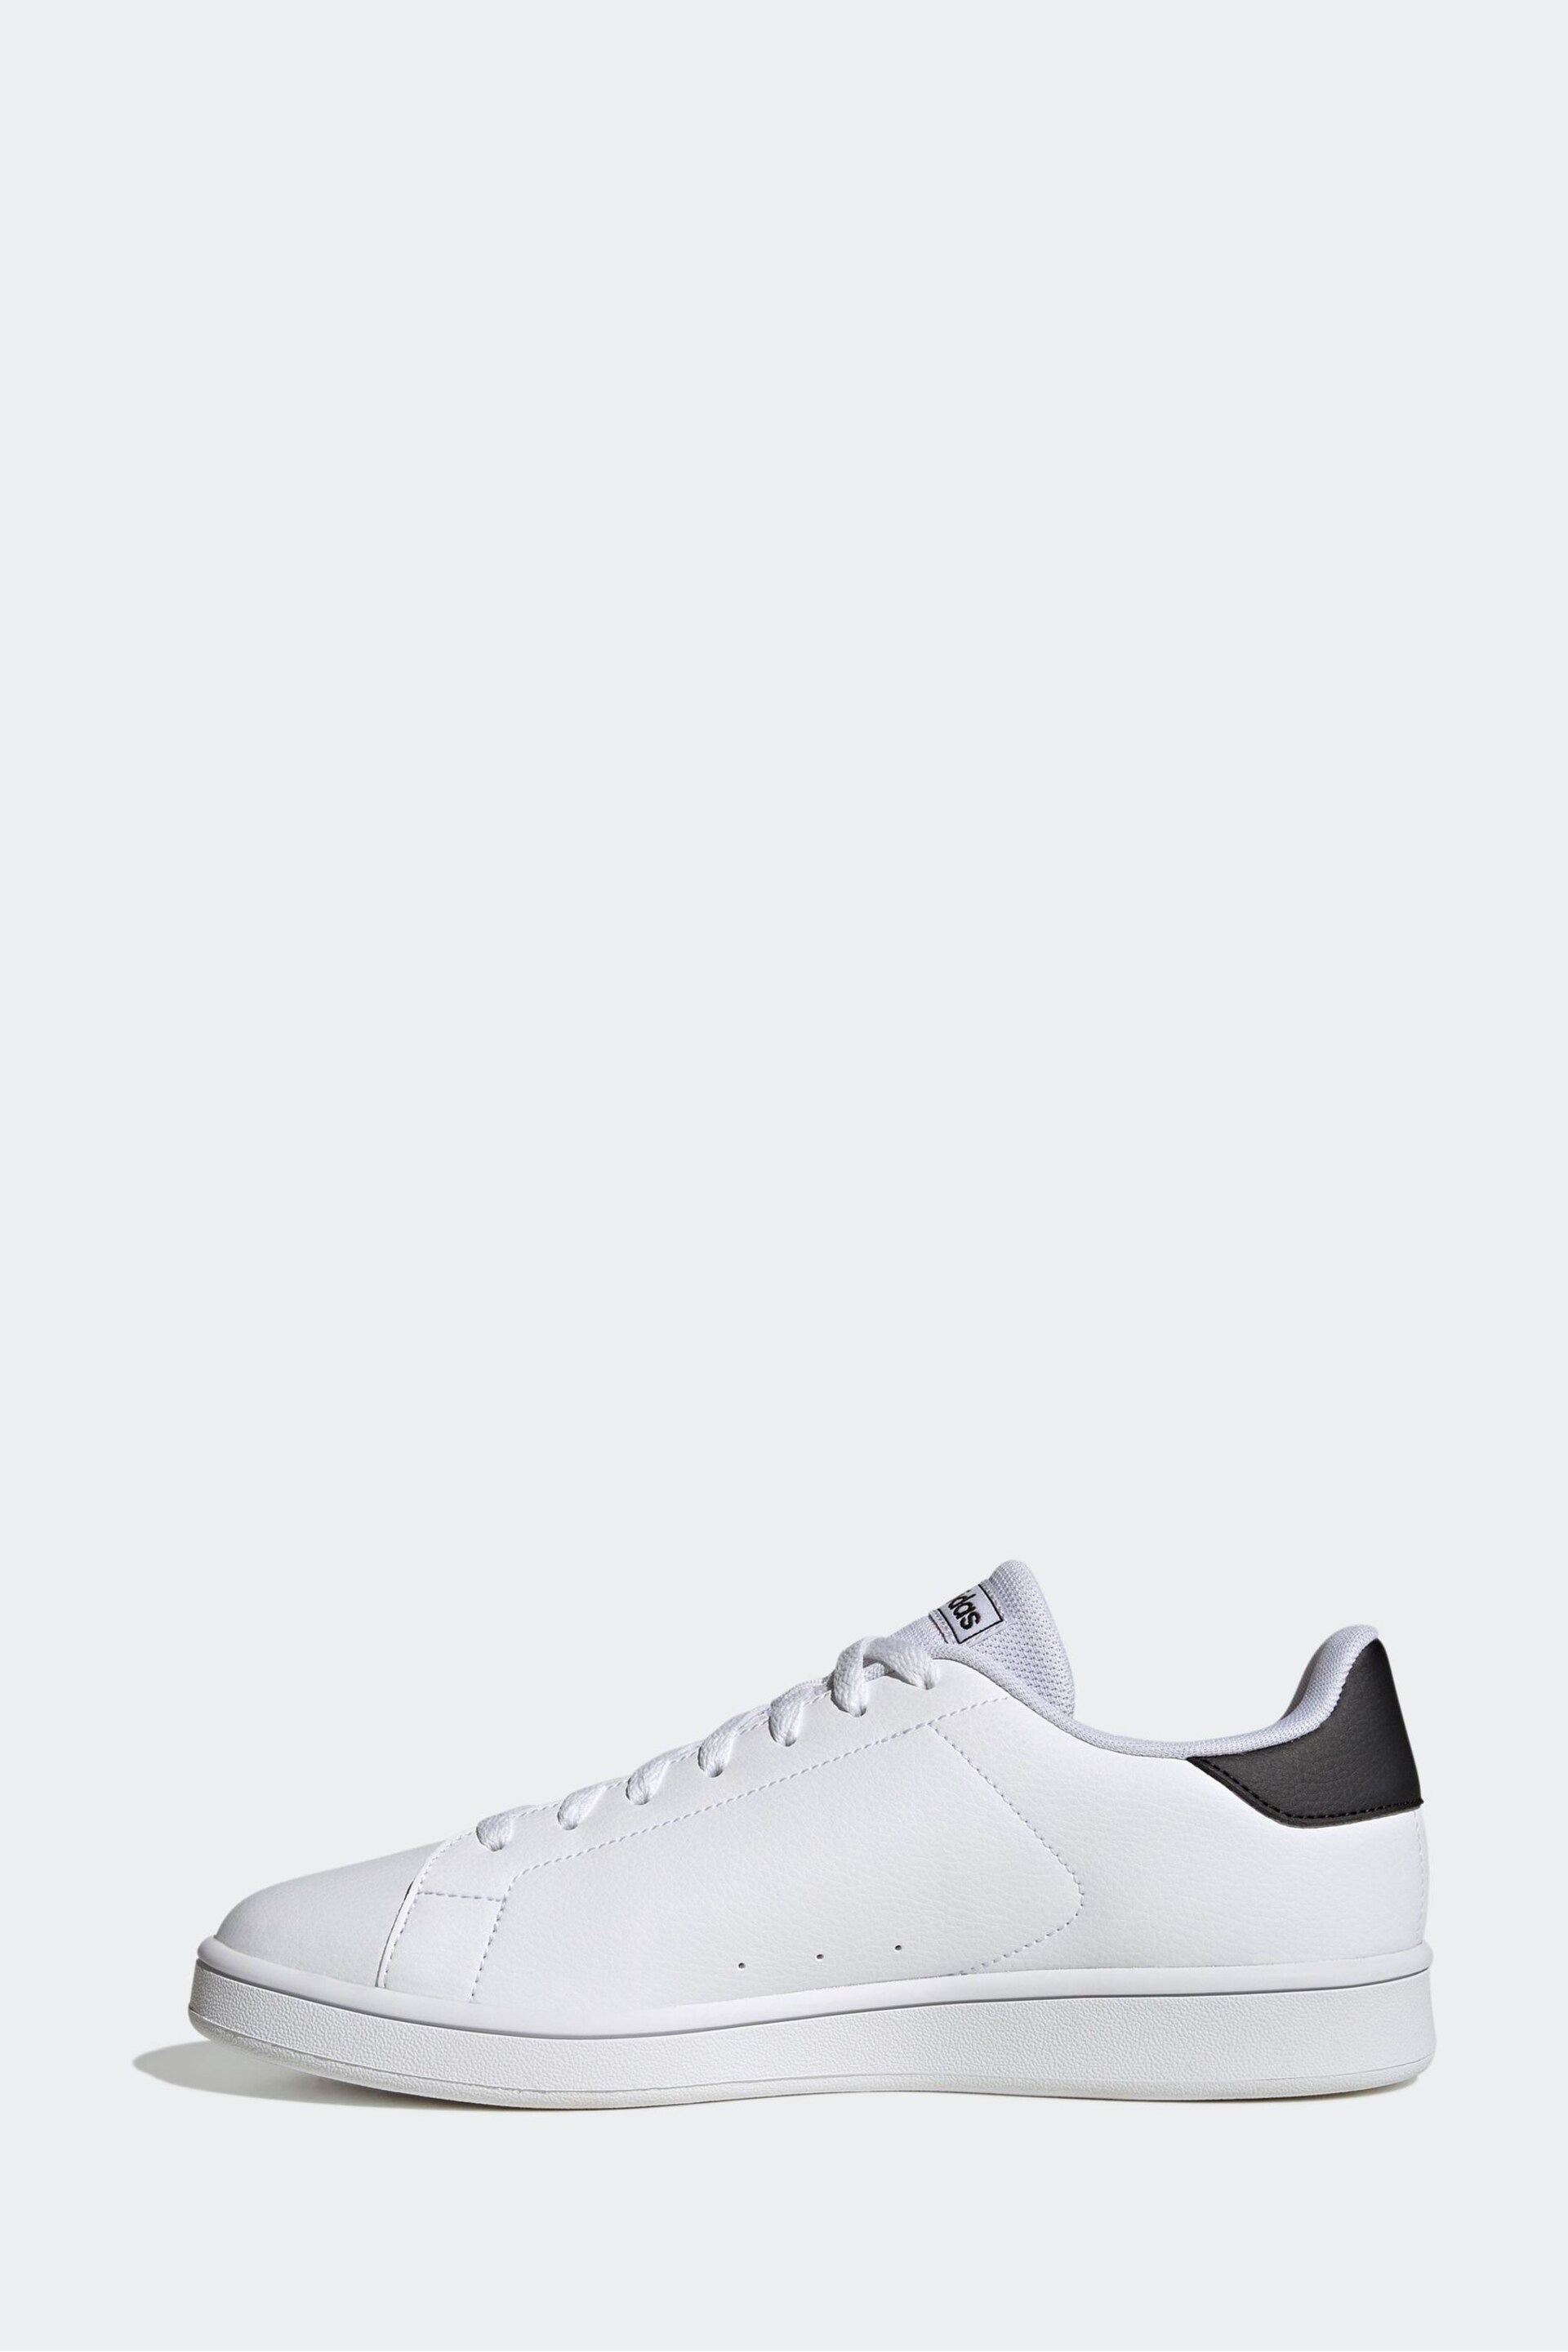 adidas White Urban Court Trainers - Image 4 of 8